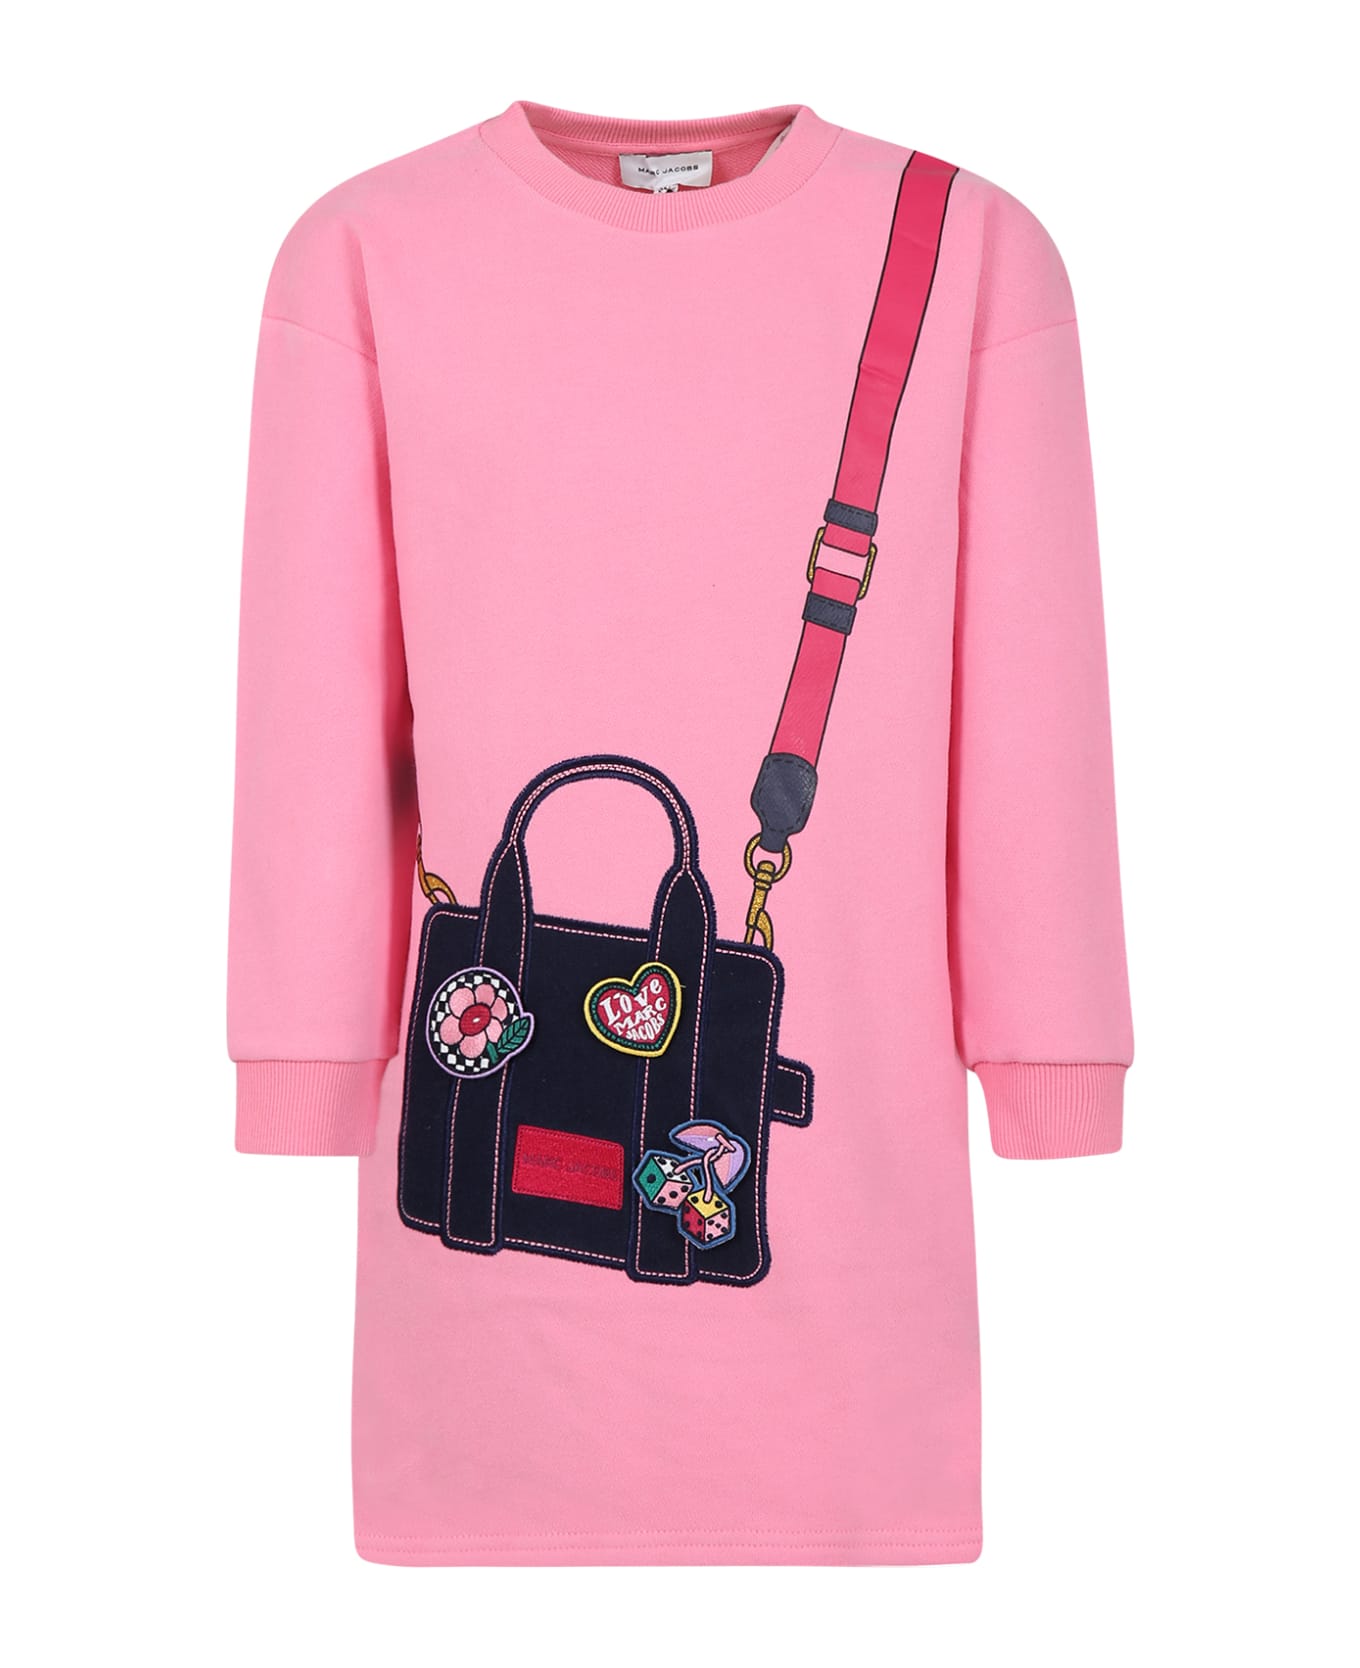 Marc Jacobs Casual Pink Dress For Girl With Logo - Pink ワンピース＆ドレス